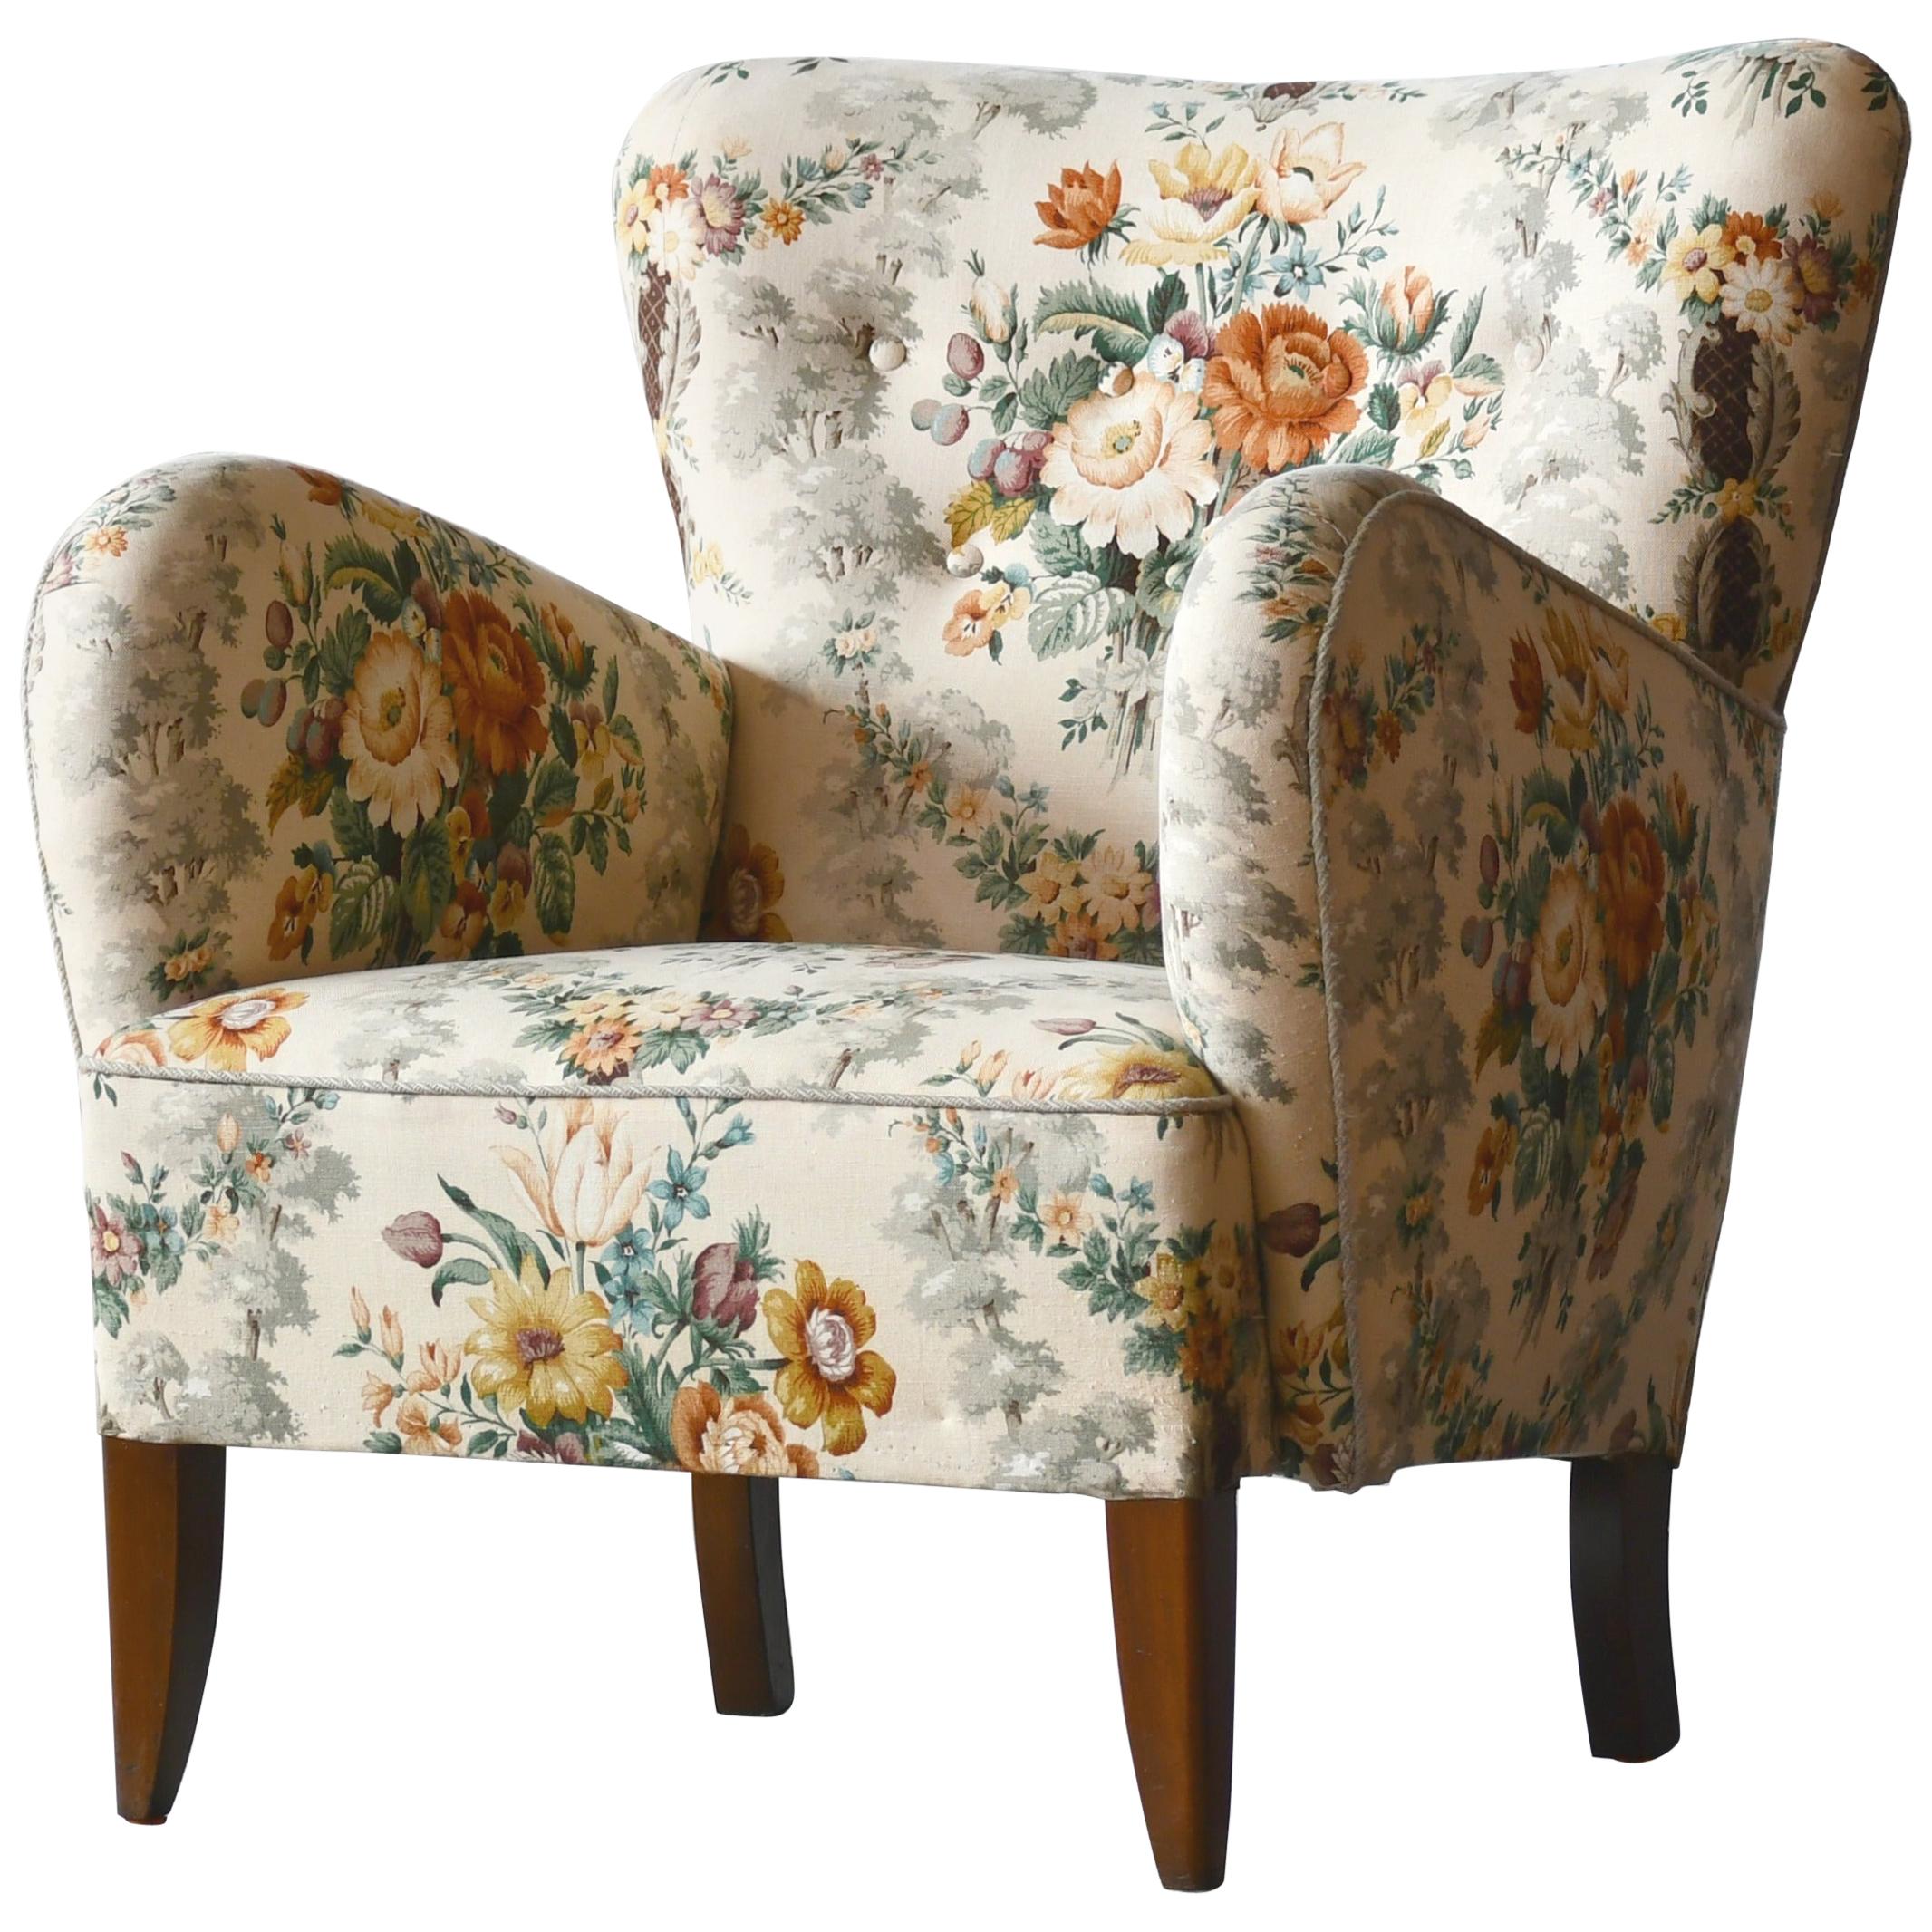 Danish Midcentury 1940s Flemming Lassen Style Lounge Chair in Floral Fabric